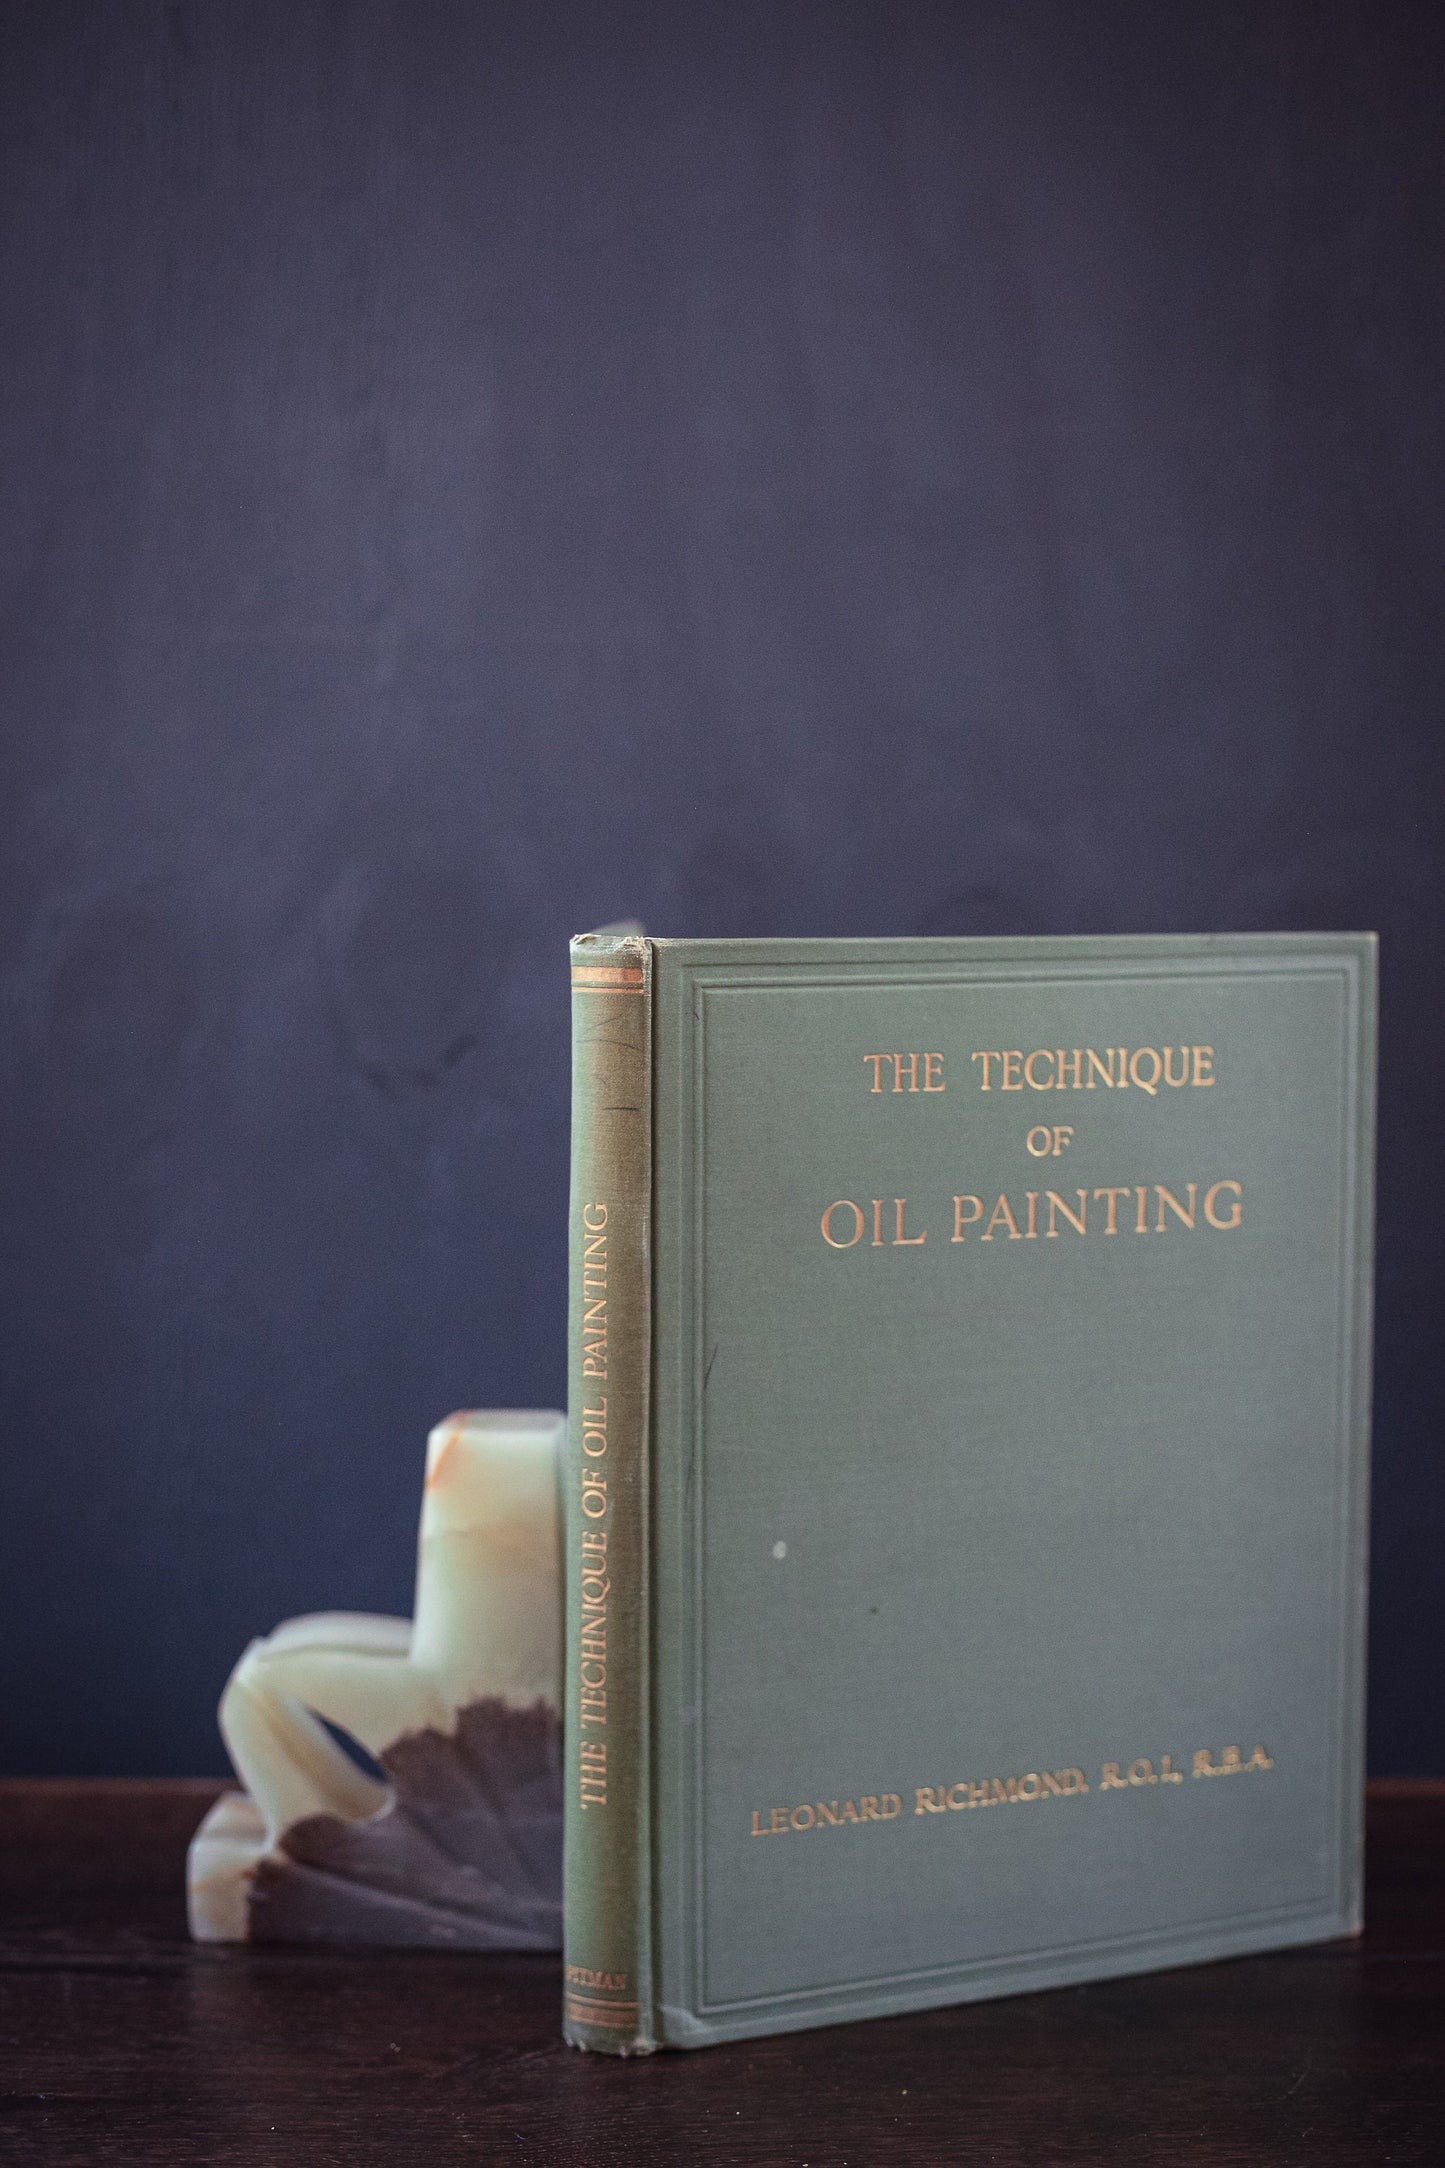 Technique of Oil Painting Leonard Richman - Vintage Book Ships Priority Mail